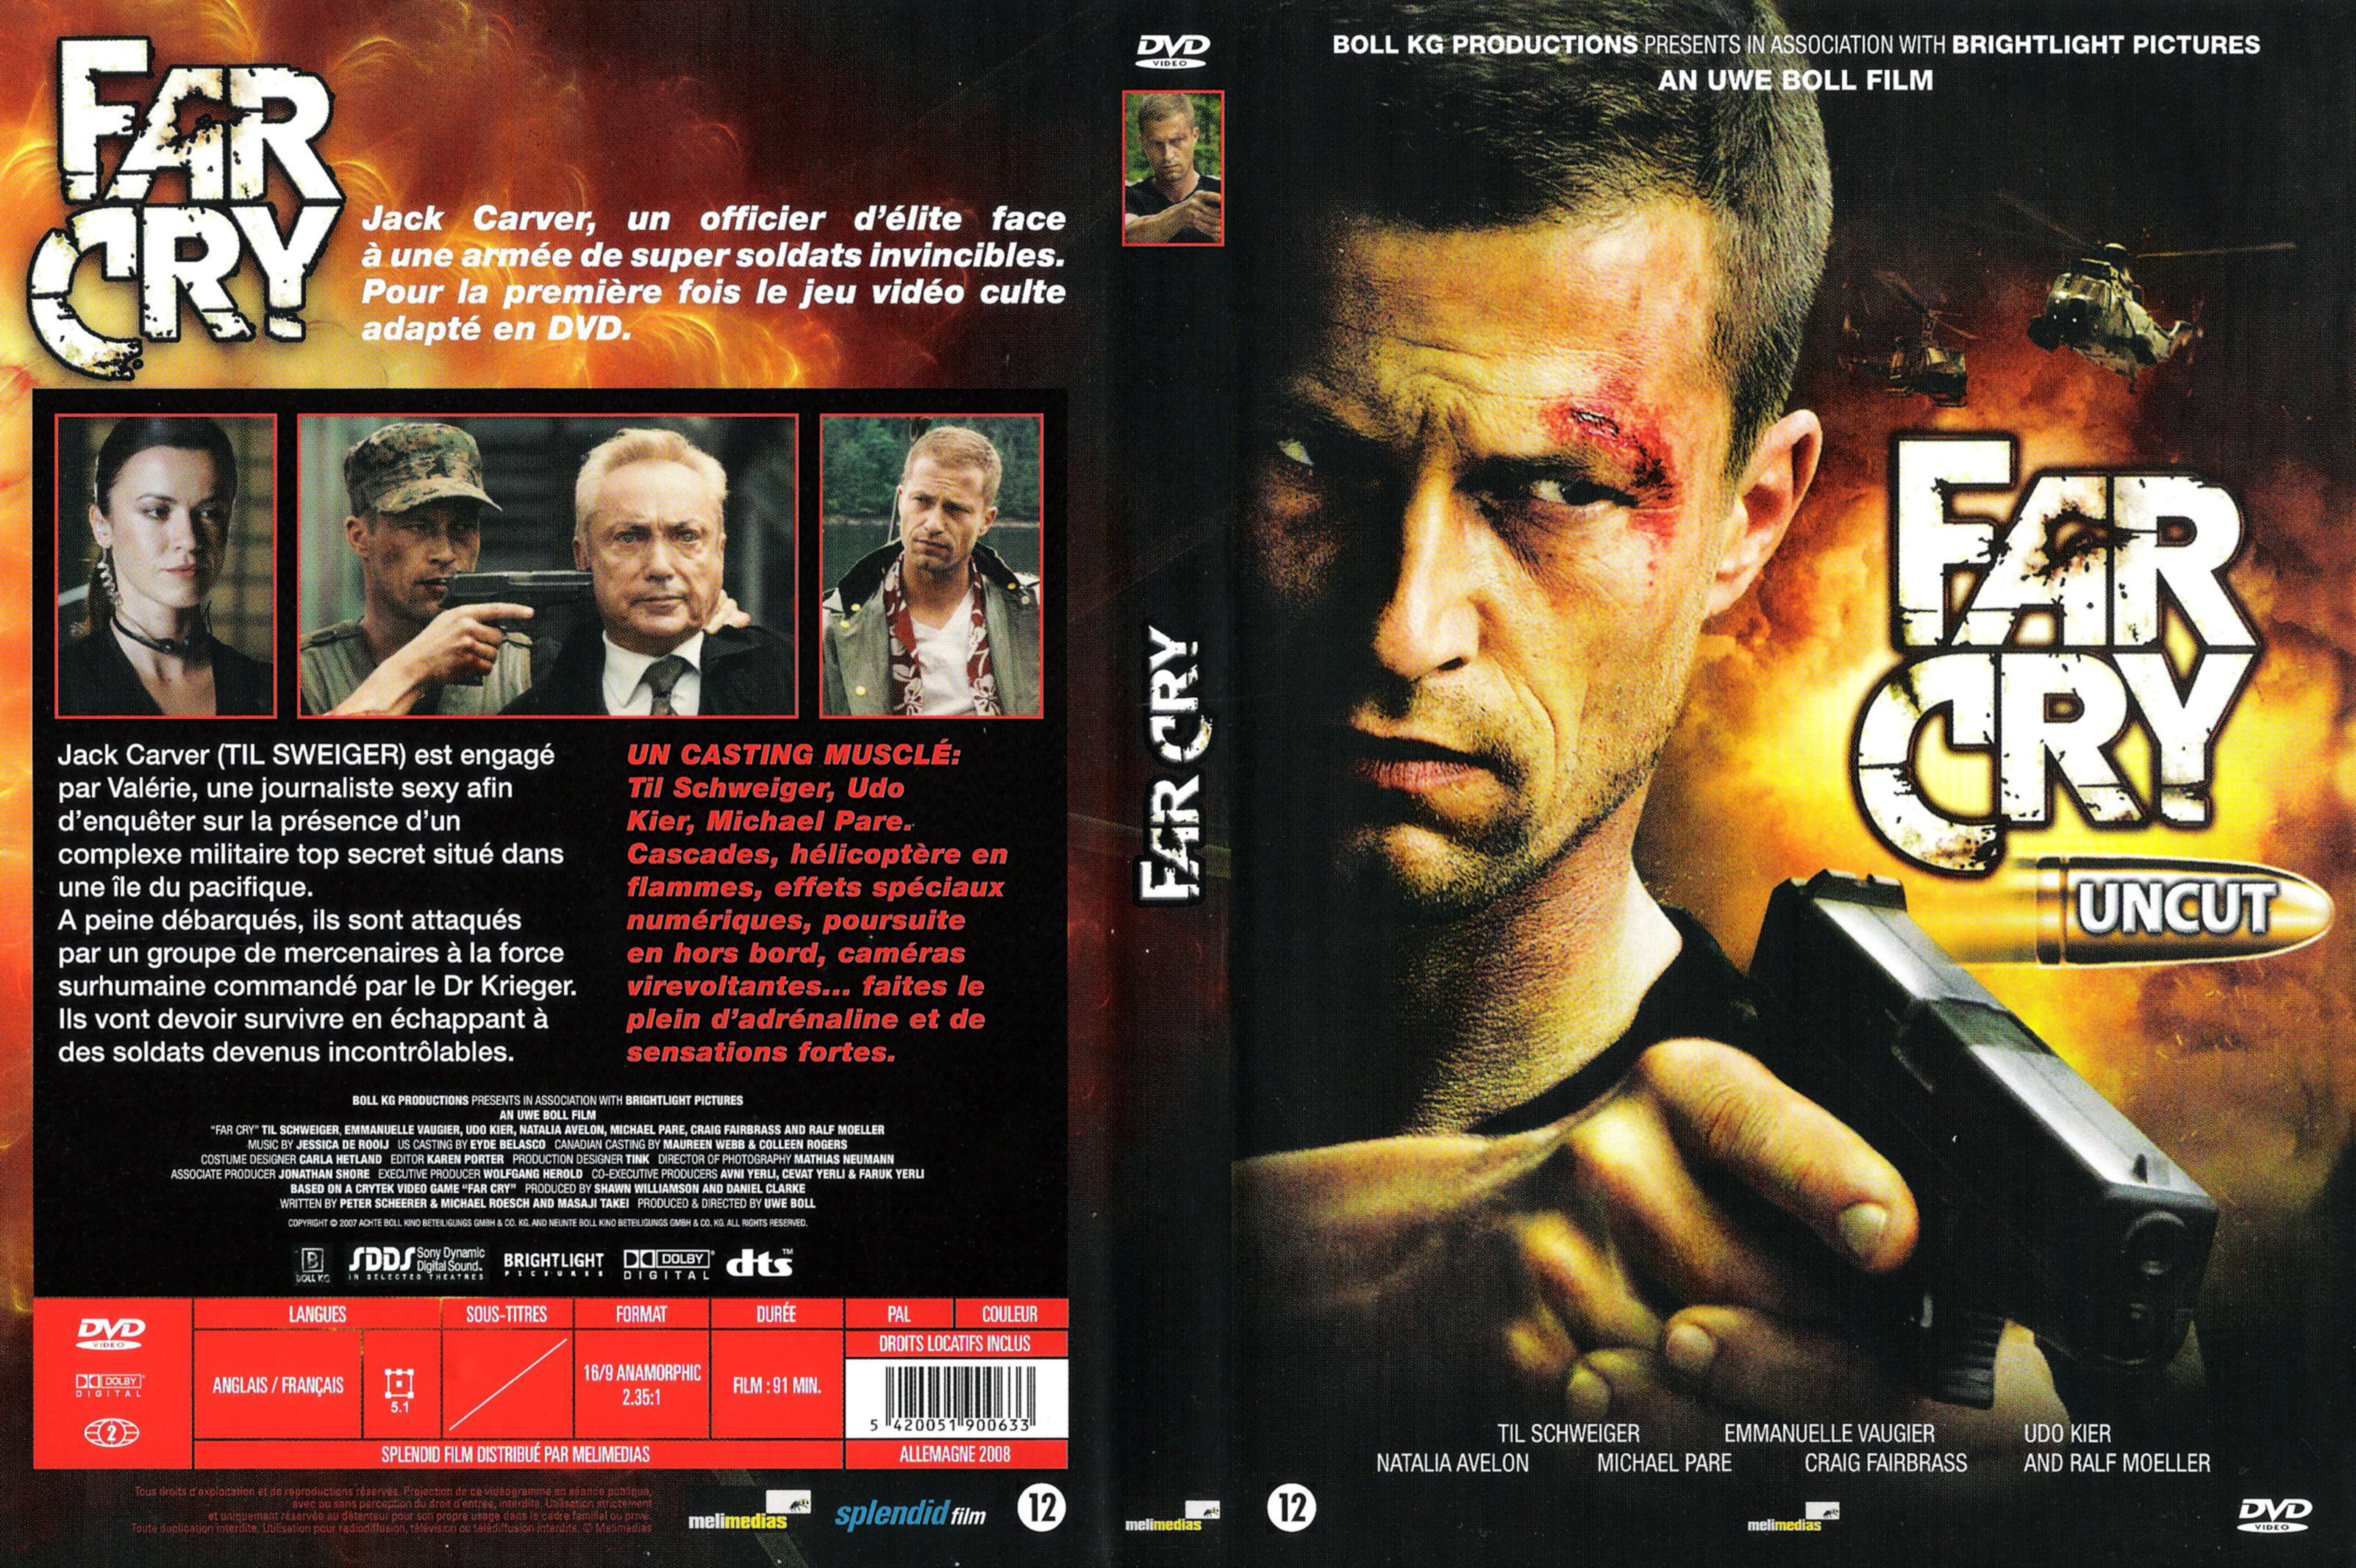 Jaquette DVD Far cry